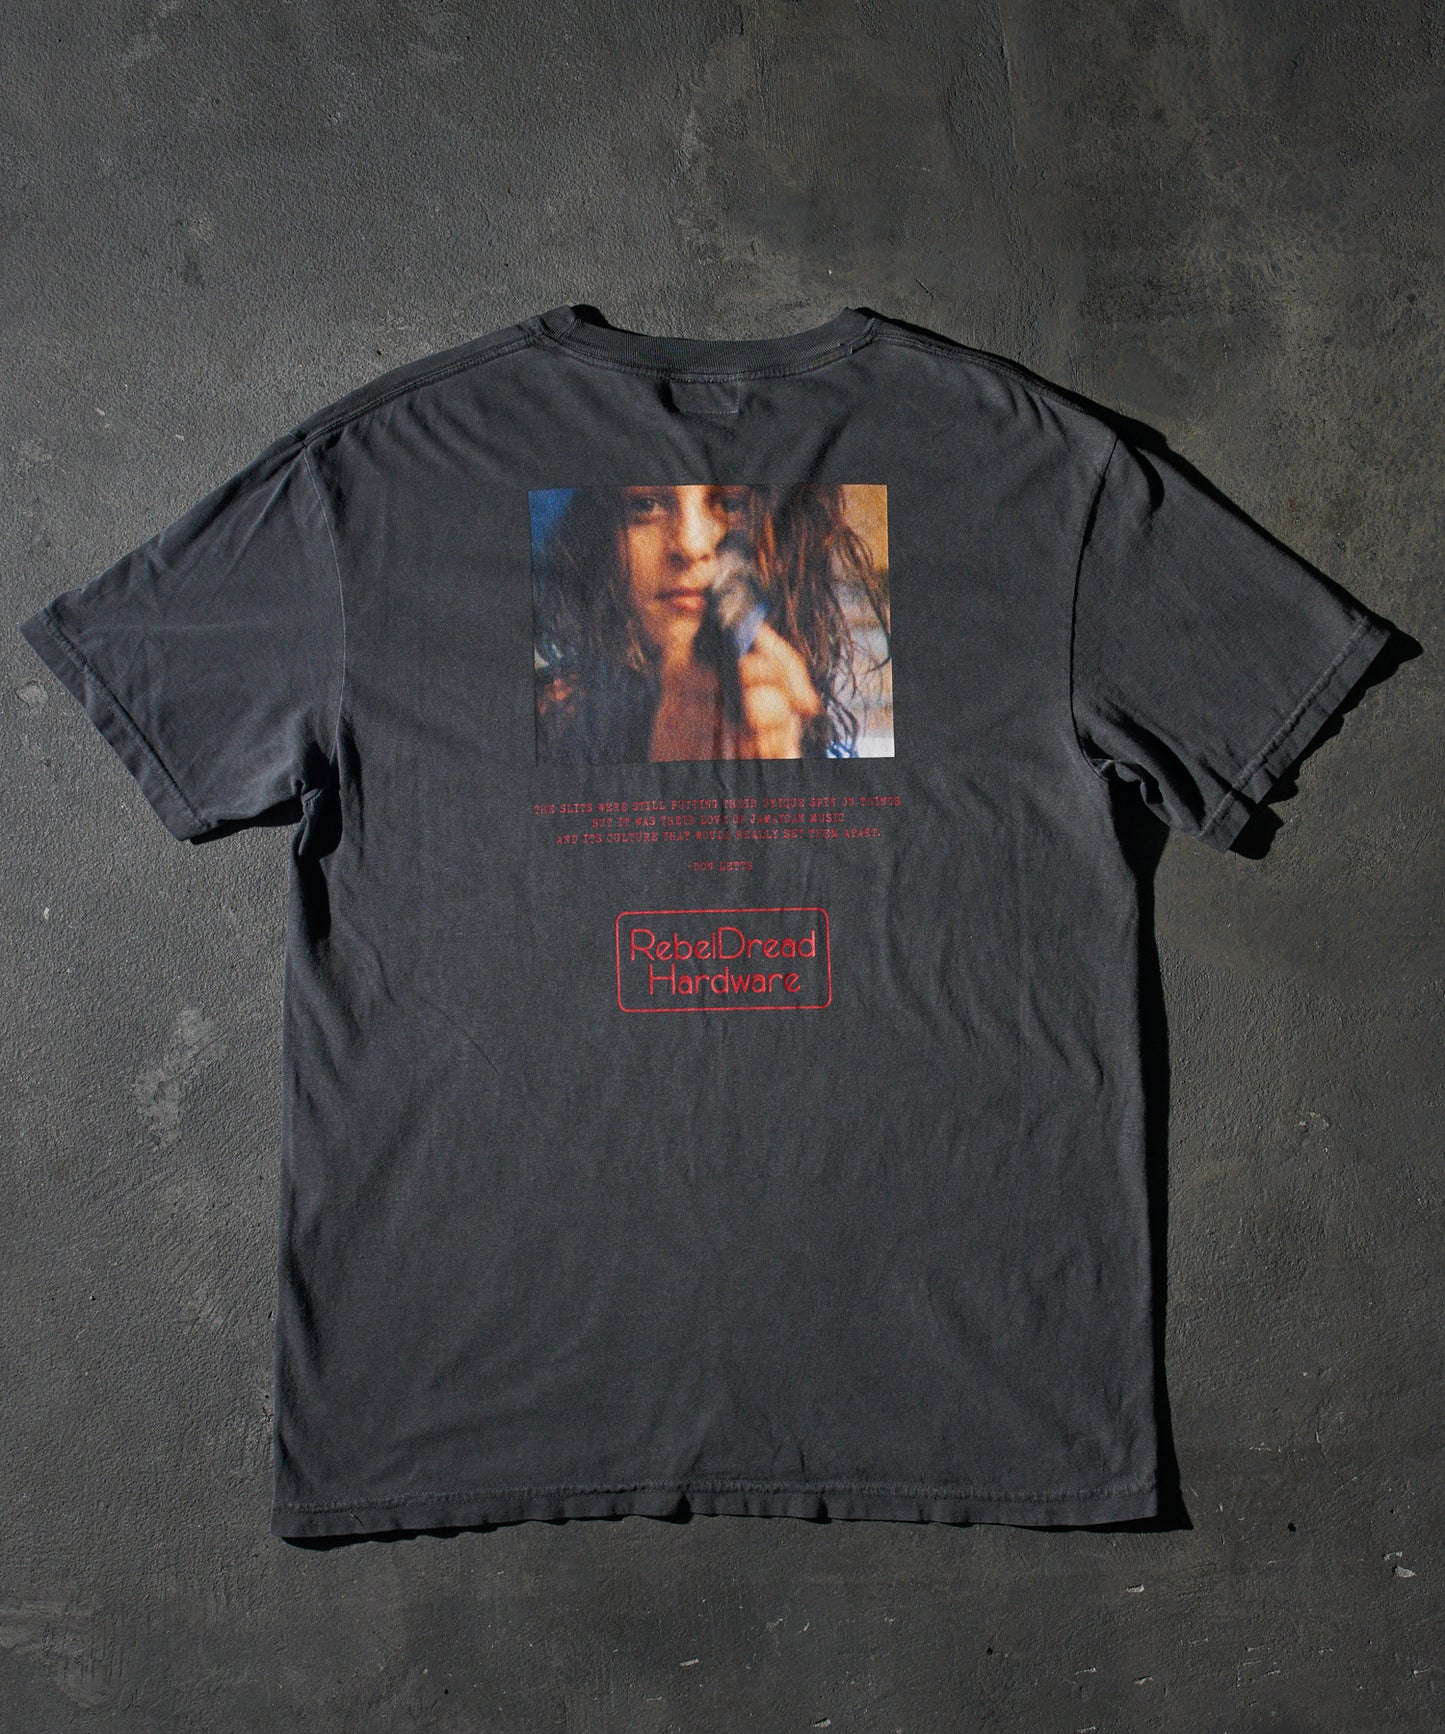 "ARI UP from THE SLITS" Tee